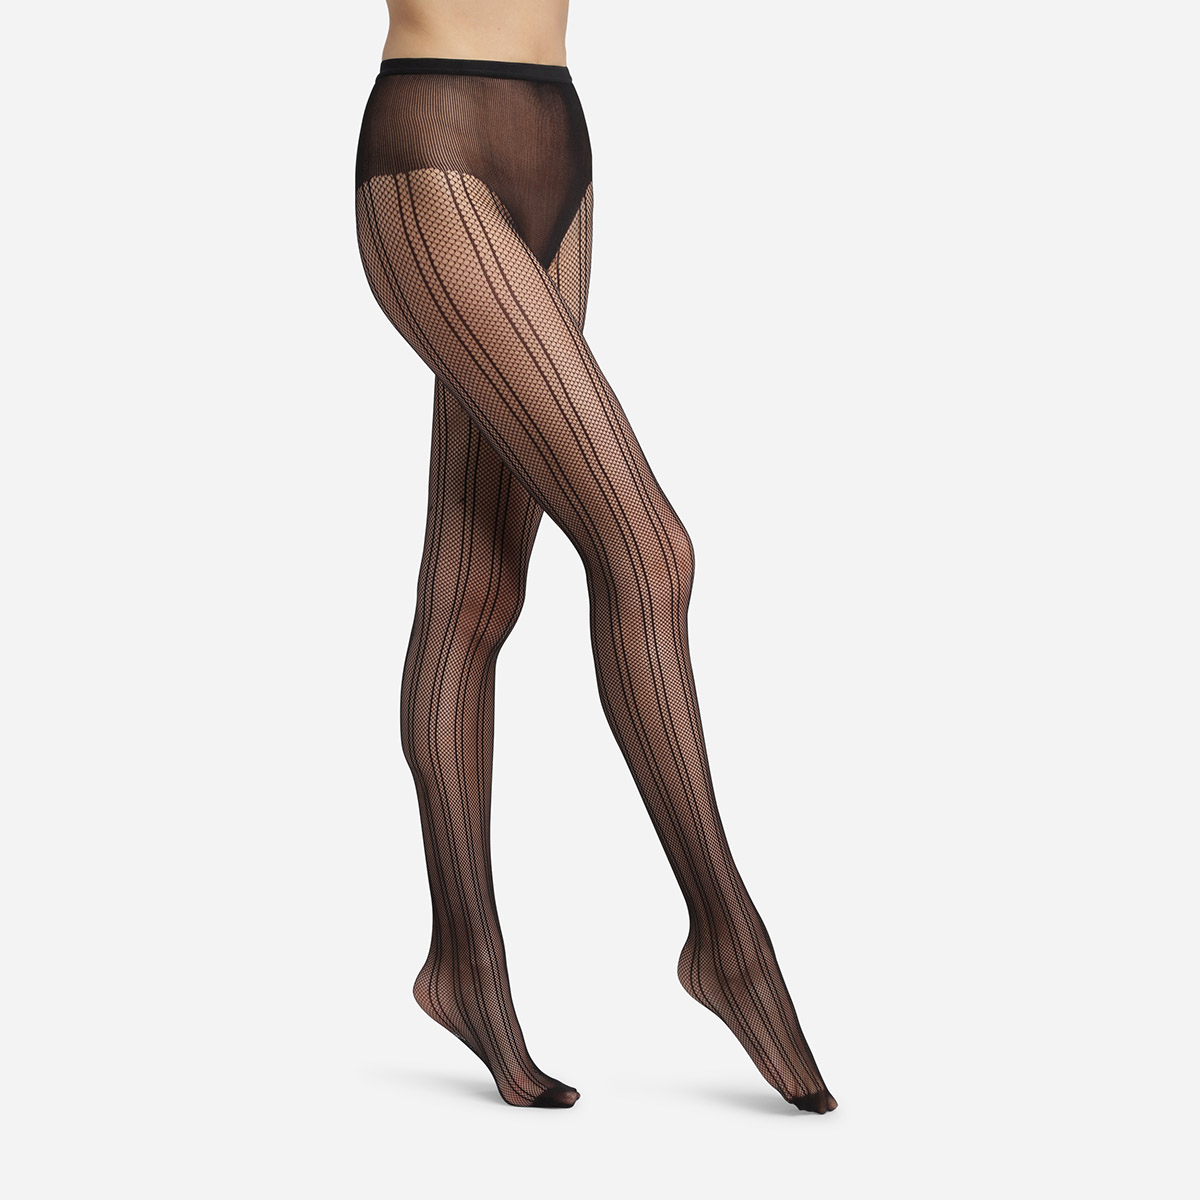 Women's black sheer tights with Dim Style logo pattern